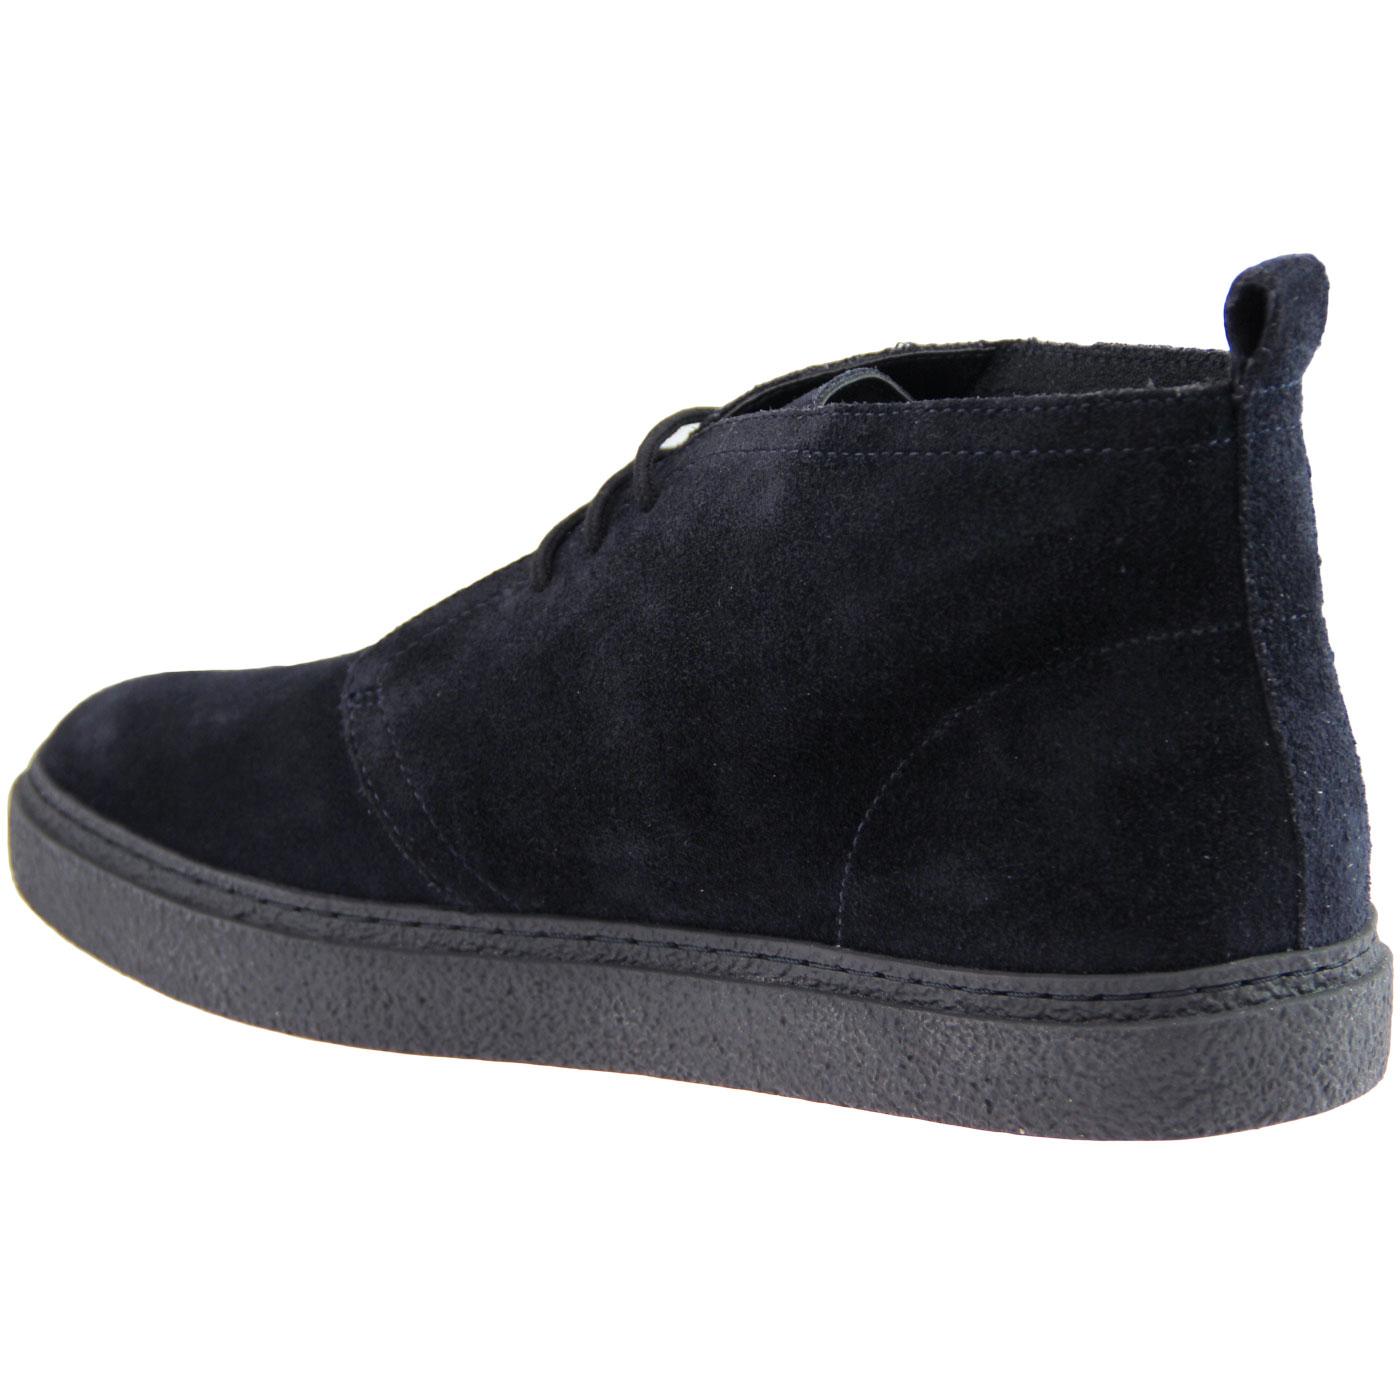 FRED PERRY Hawley Retro Mod Suede Desert Boots in Navy